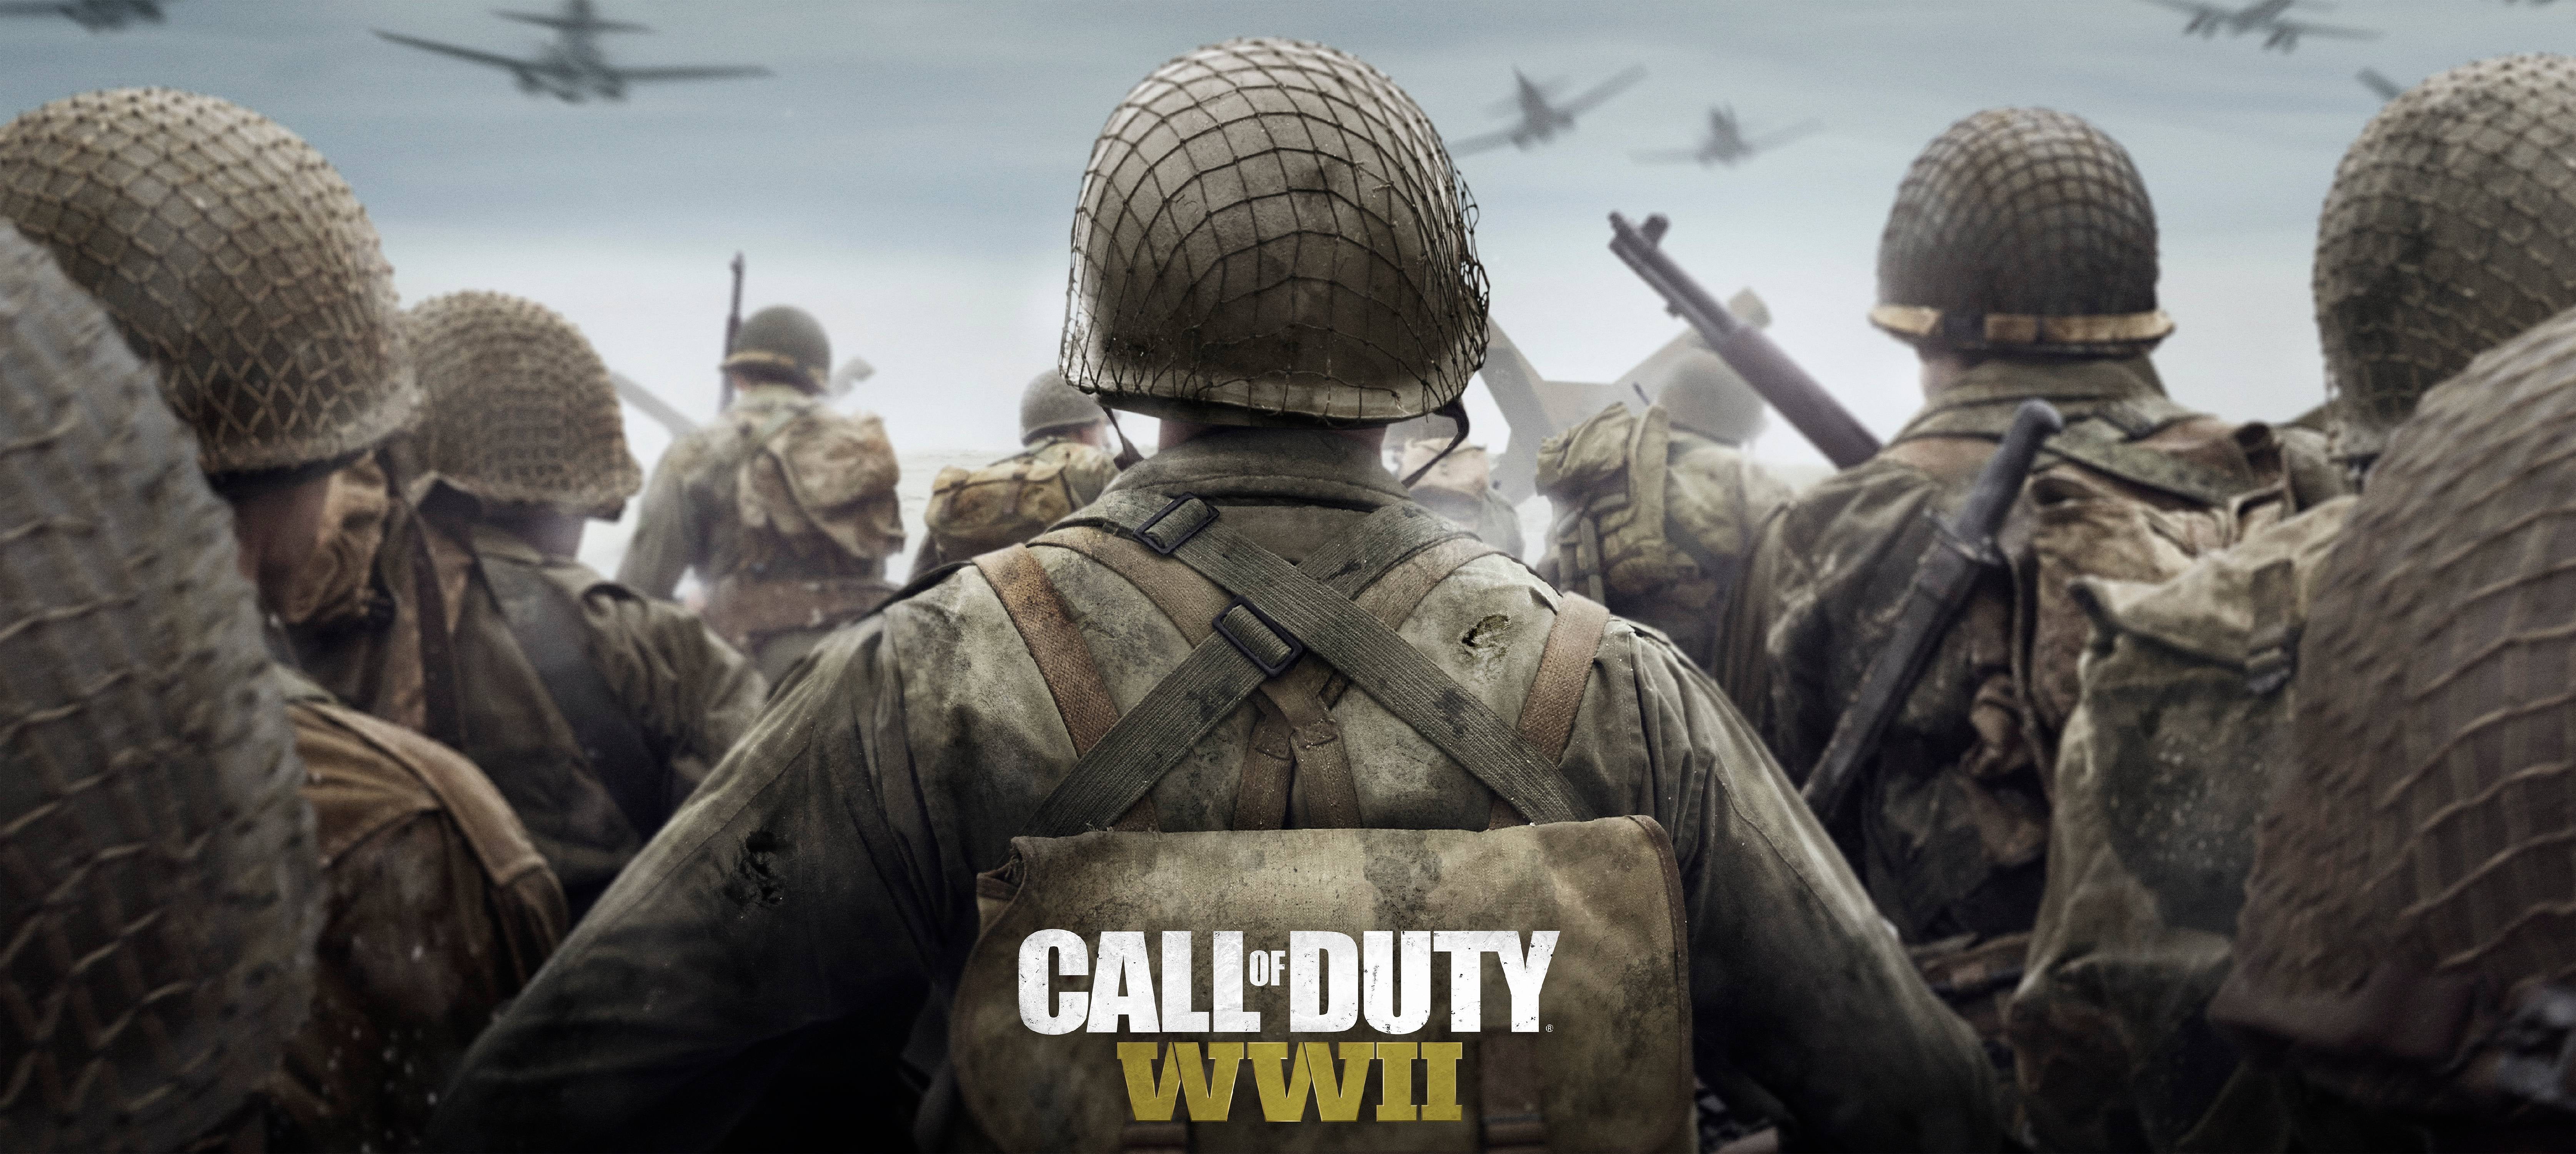 Call of Duty: WWII, Activision, Xbox One, 047875881129 ... - 